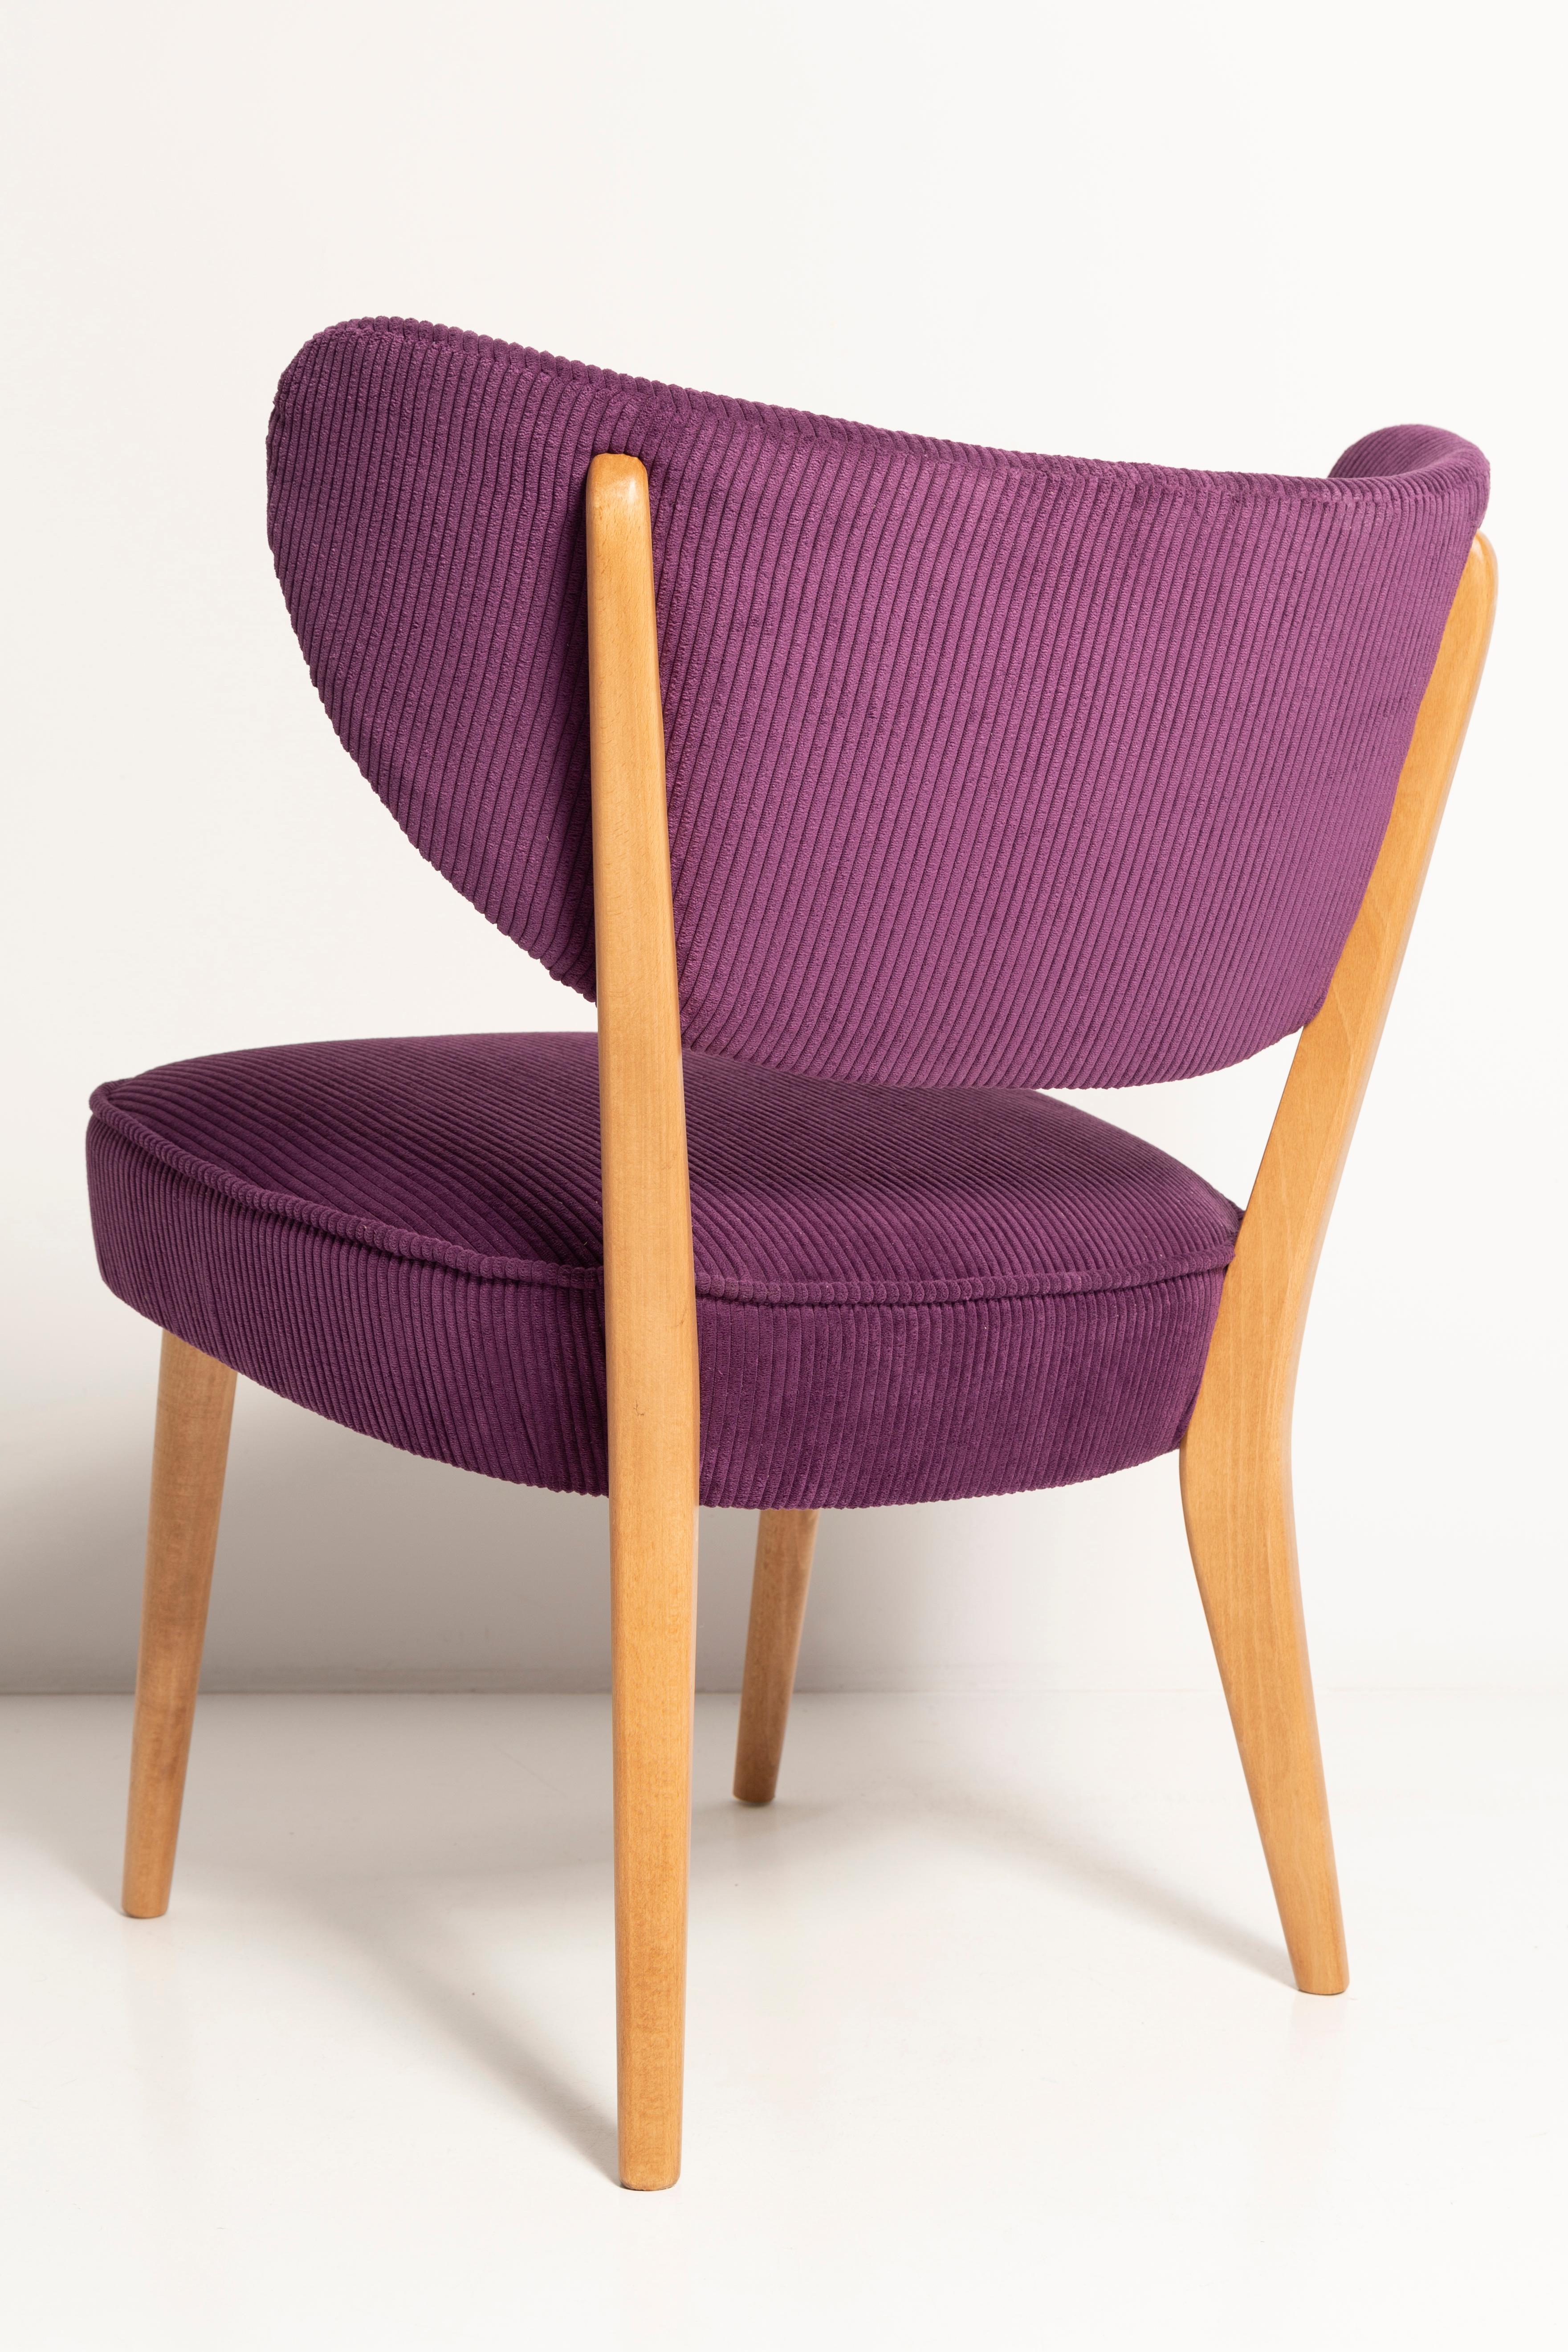 Midcentury Style Violet Velvet Club Chair, by Vintola Studio, Europe, Poland For Sale 1